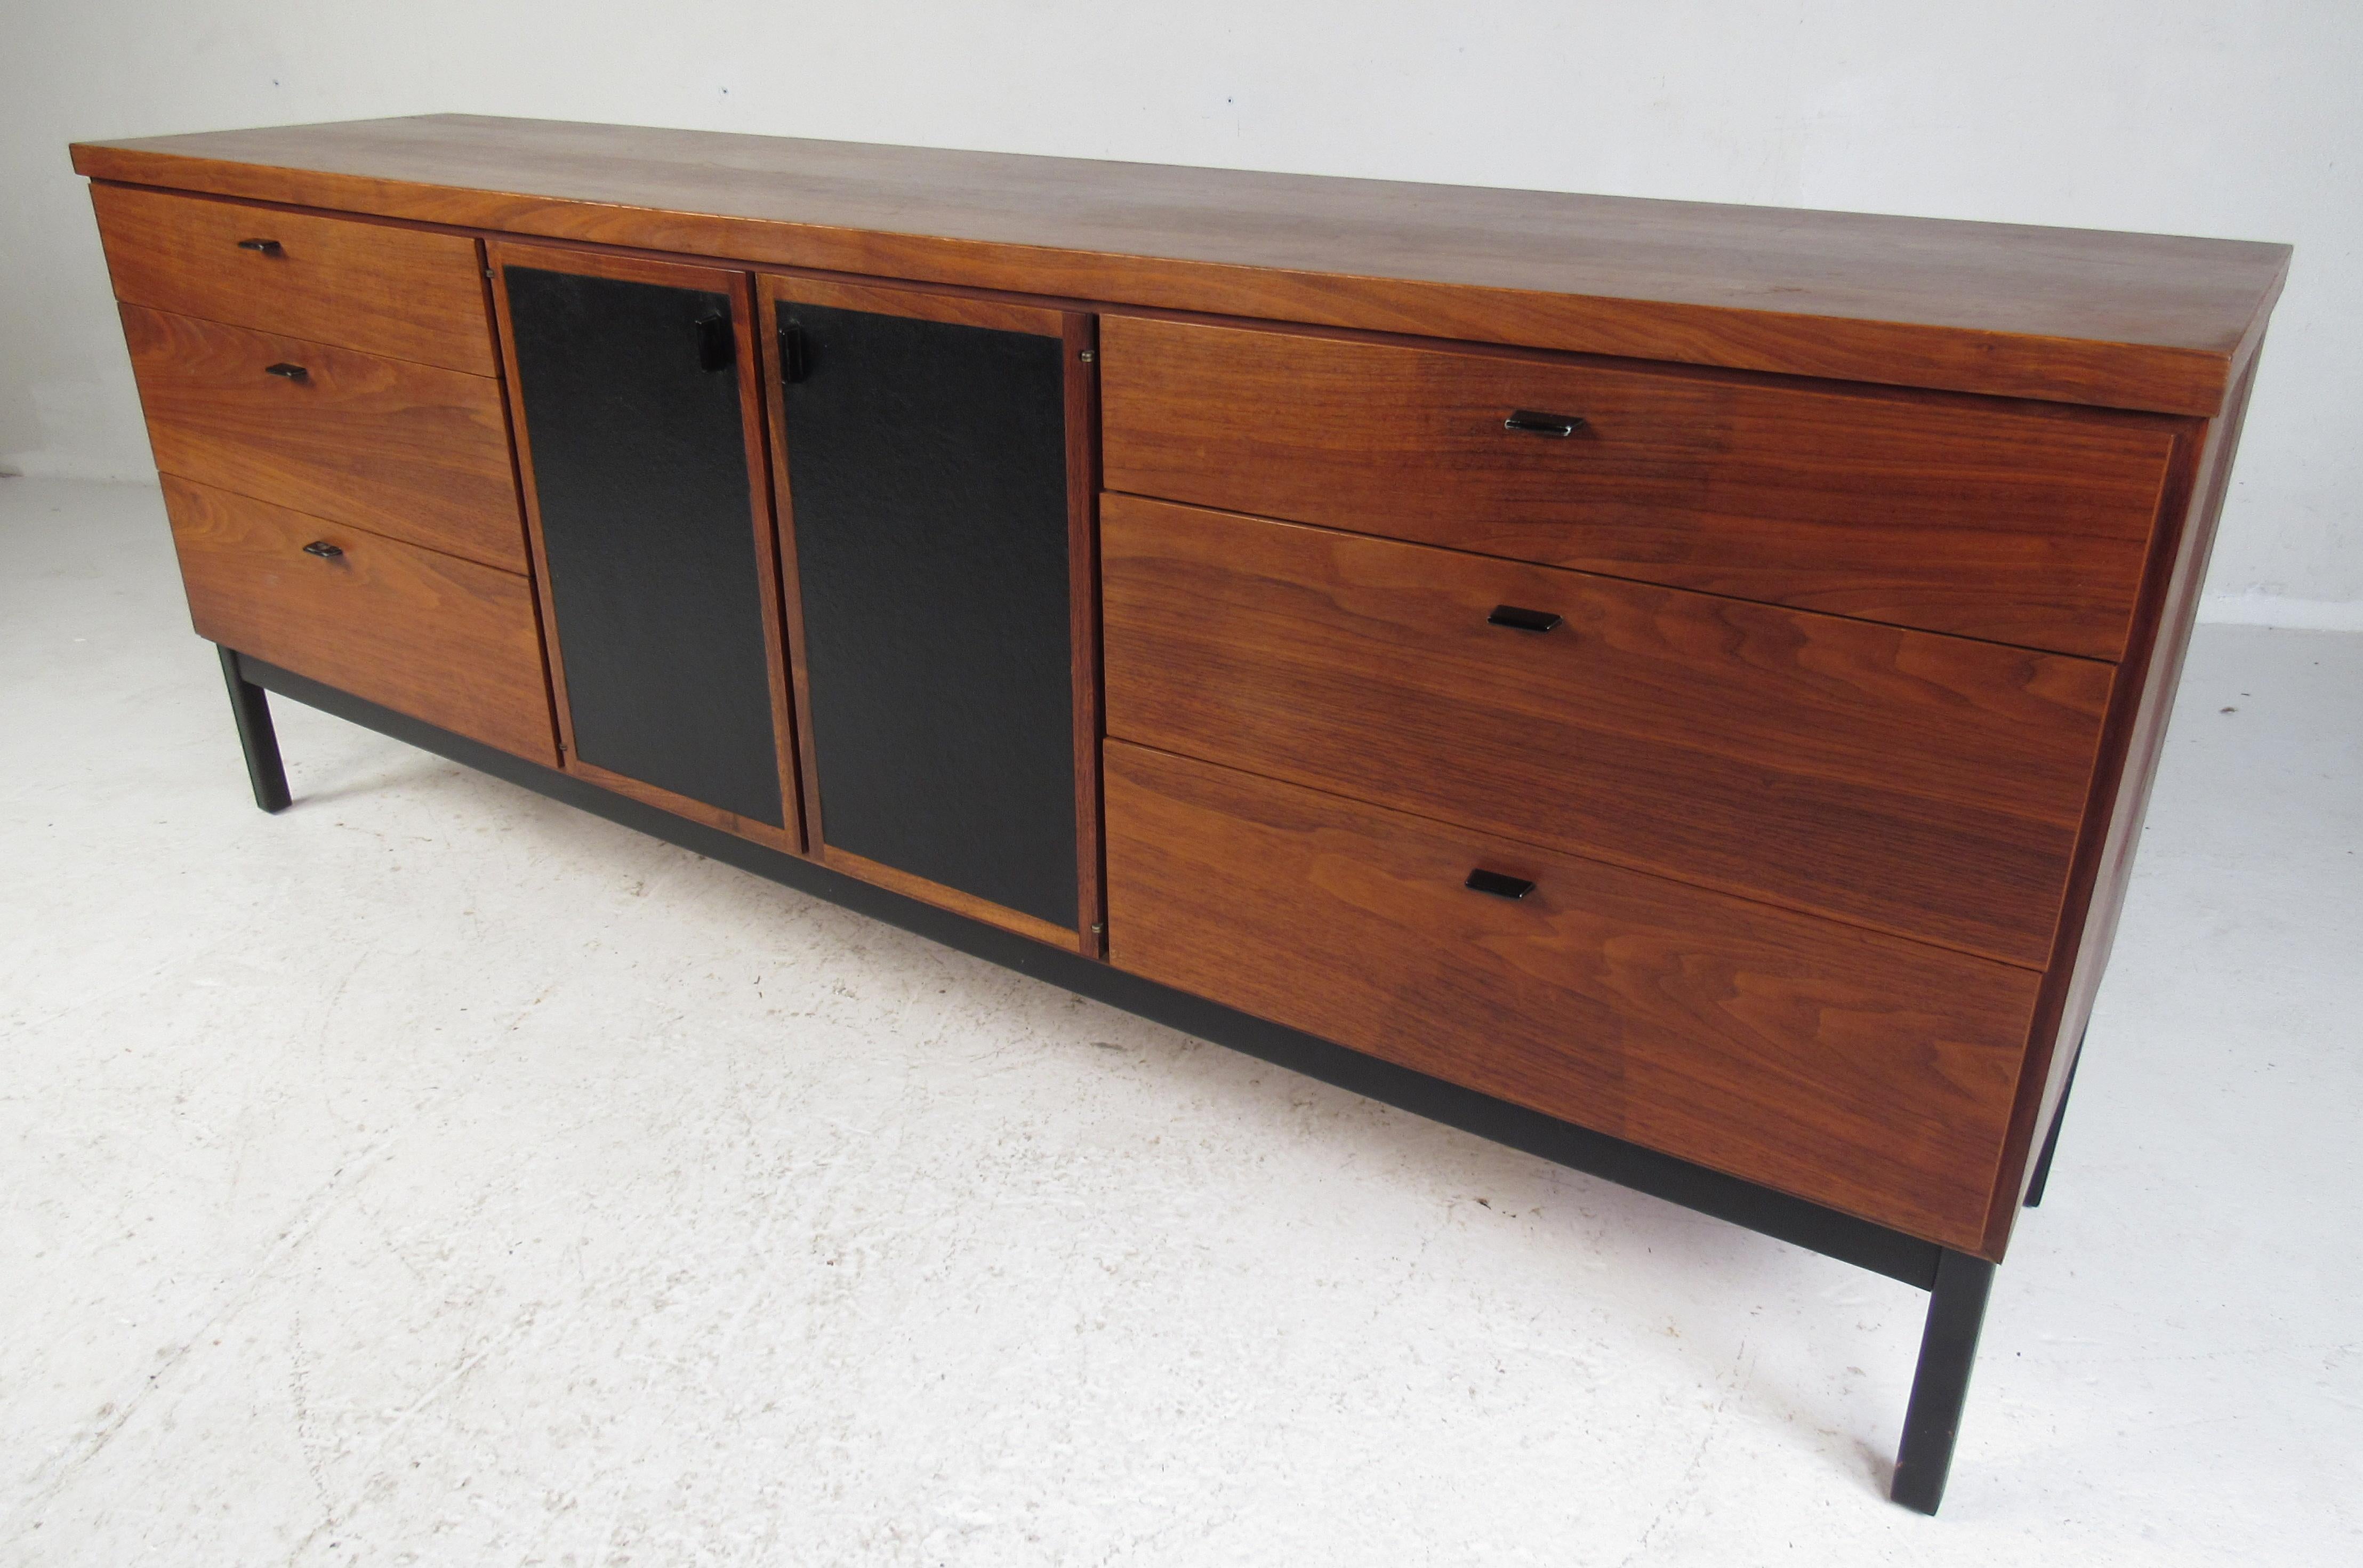 A stunning vintage modern dresser that features two cabinet doors with leather fronts in the center. A sleek two-tone design with a black painted base, unusual drawer pulls and a vintage walnut finish. This beautiful midcentury case piece offers